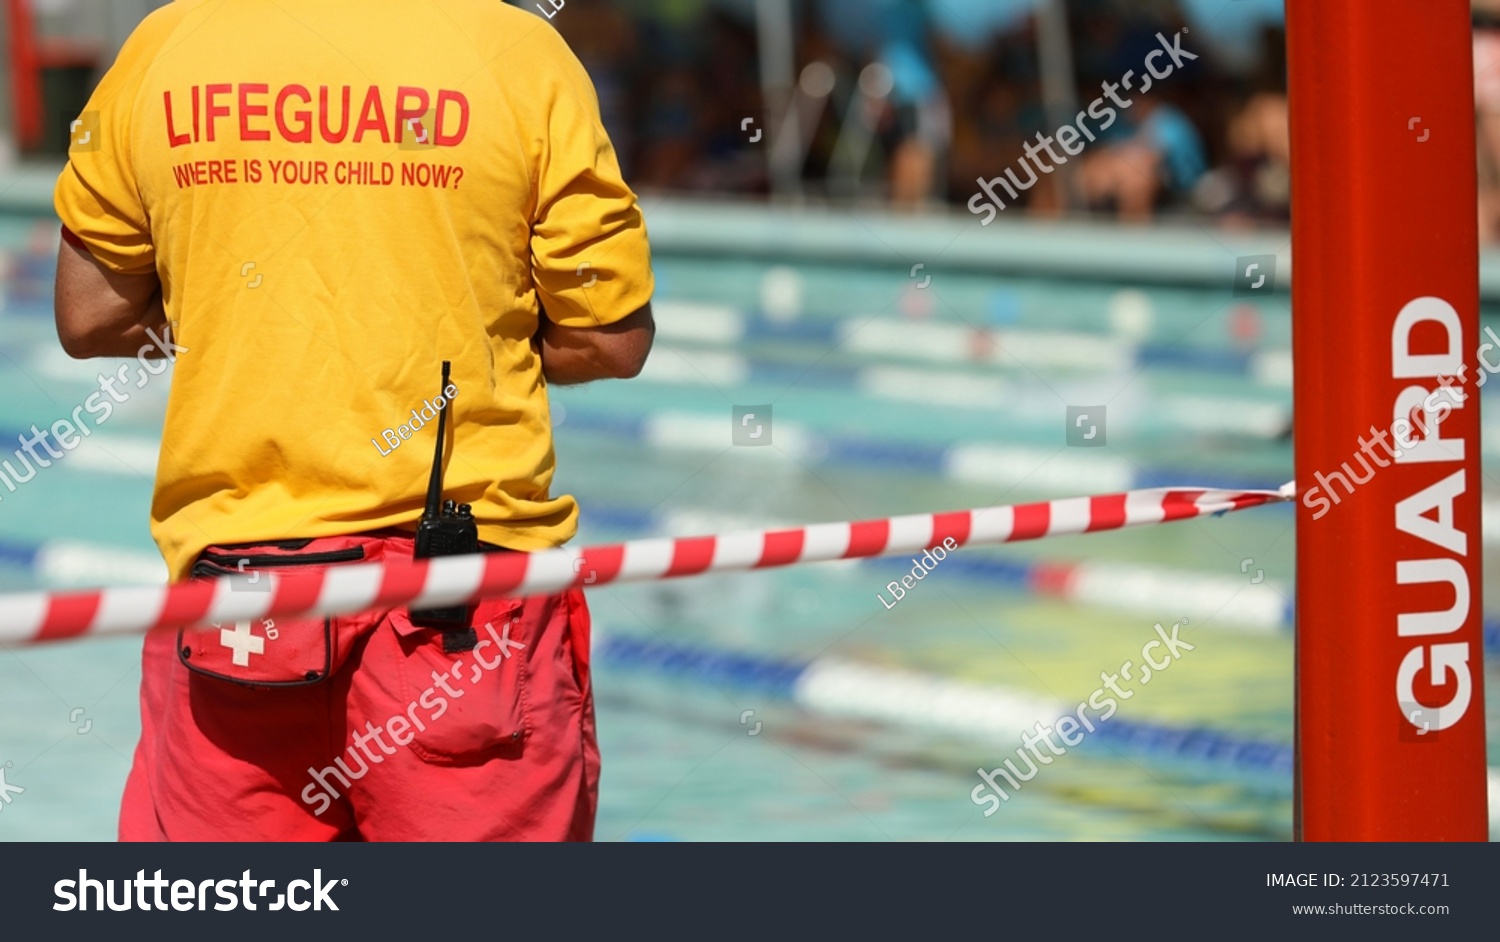 A public pool life guard or pool safety officer in uniform standing duty or guard supervising swimming and children preventing drowning accidents.  #2123597471